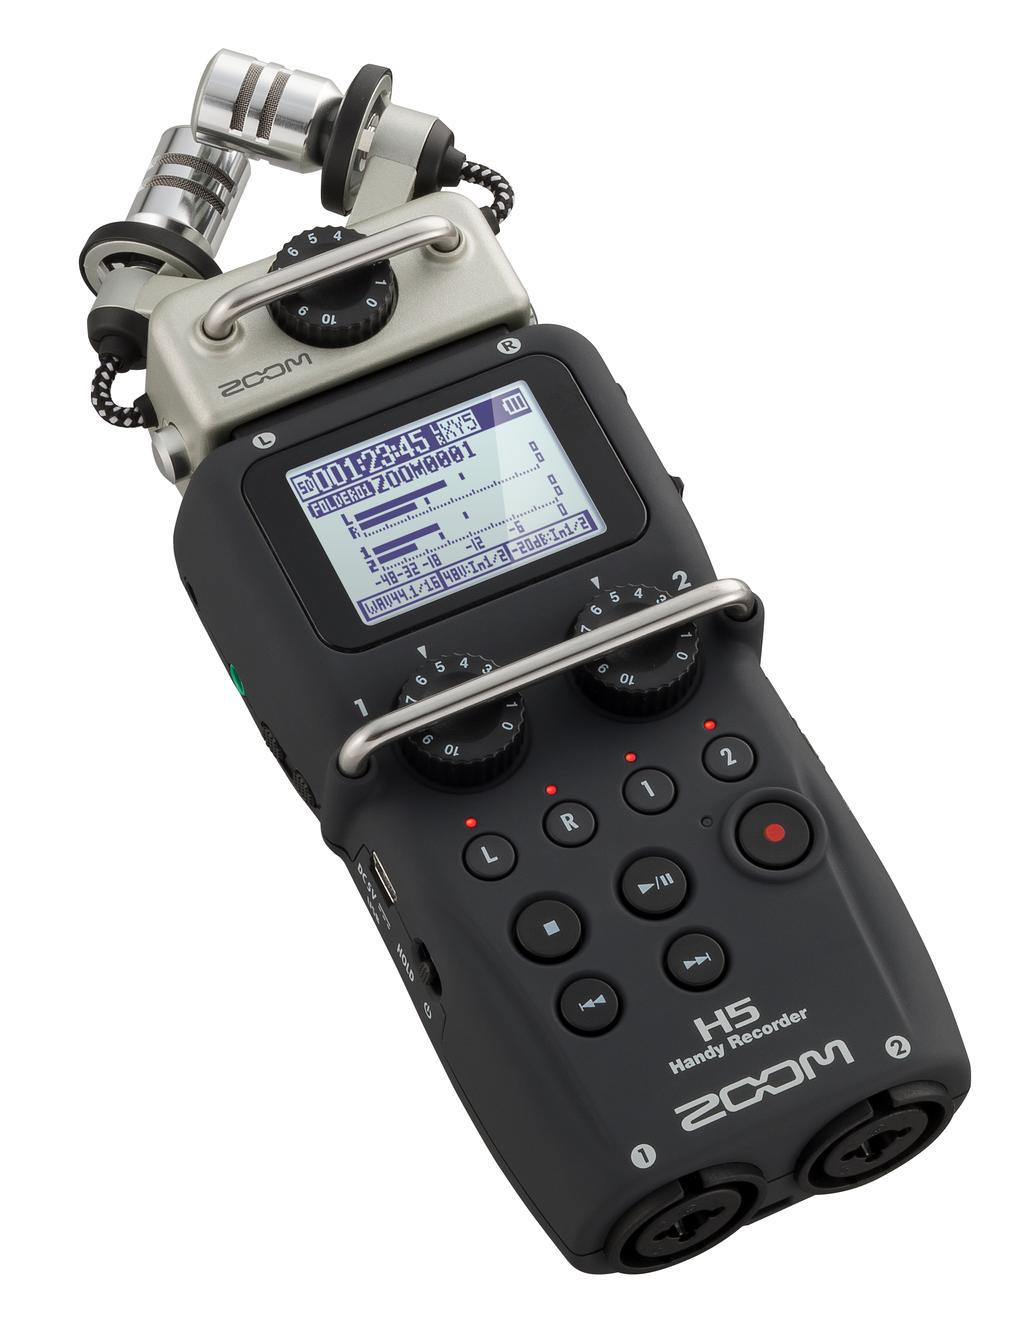 AUDIO RECORDERS Image Item Name Description # Available Zoom H4N Handy Powerful, portable, and easy-to-use recorder